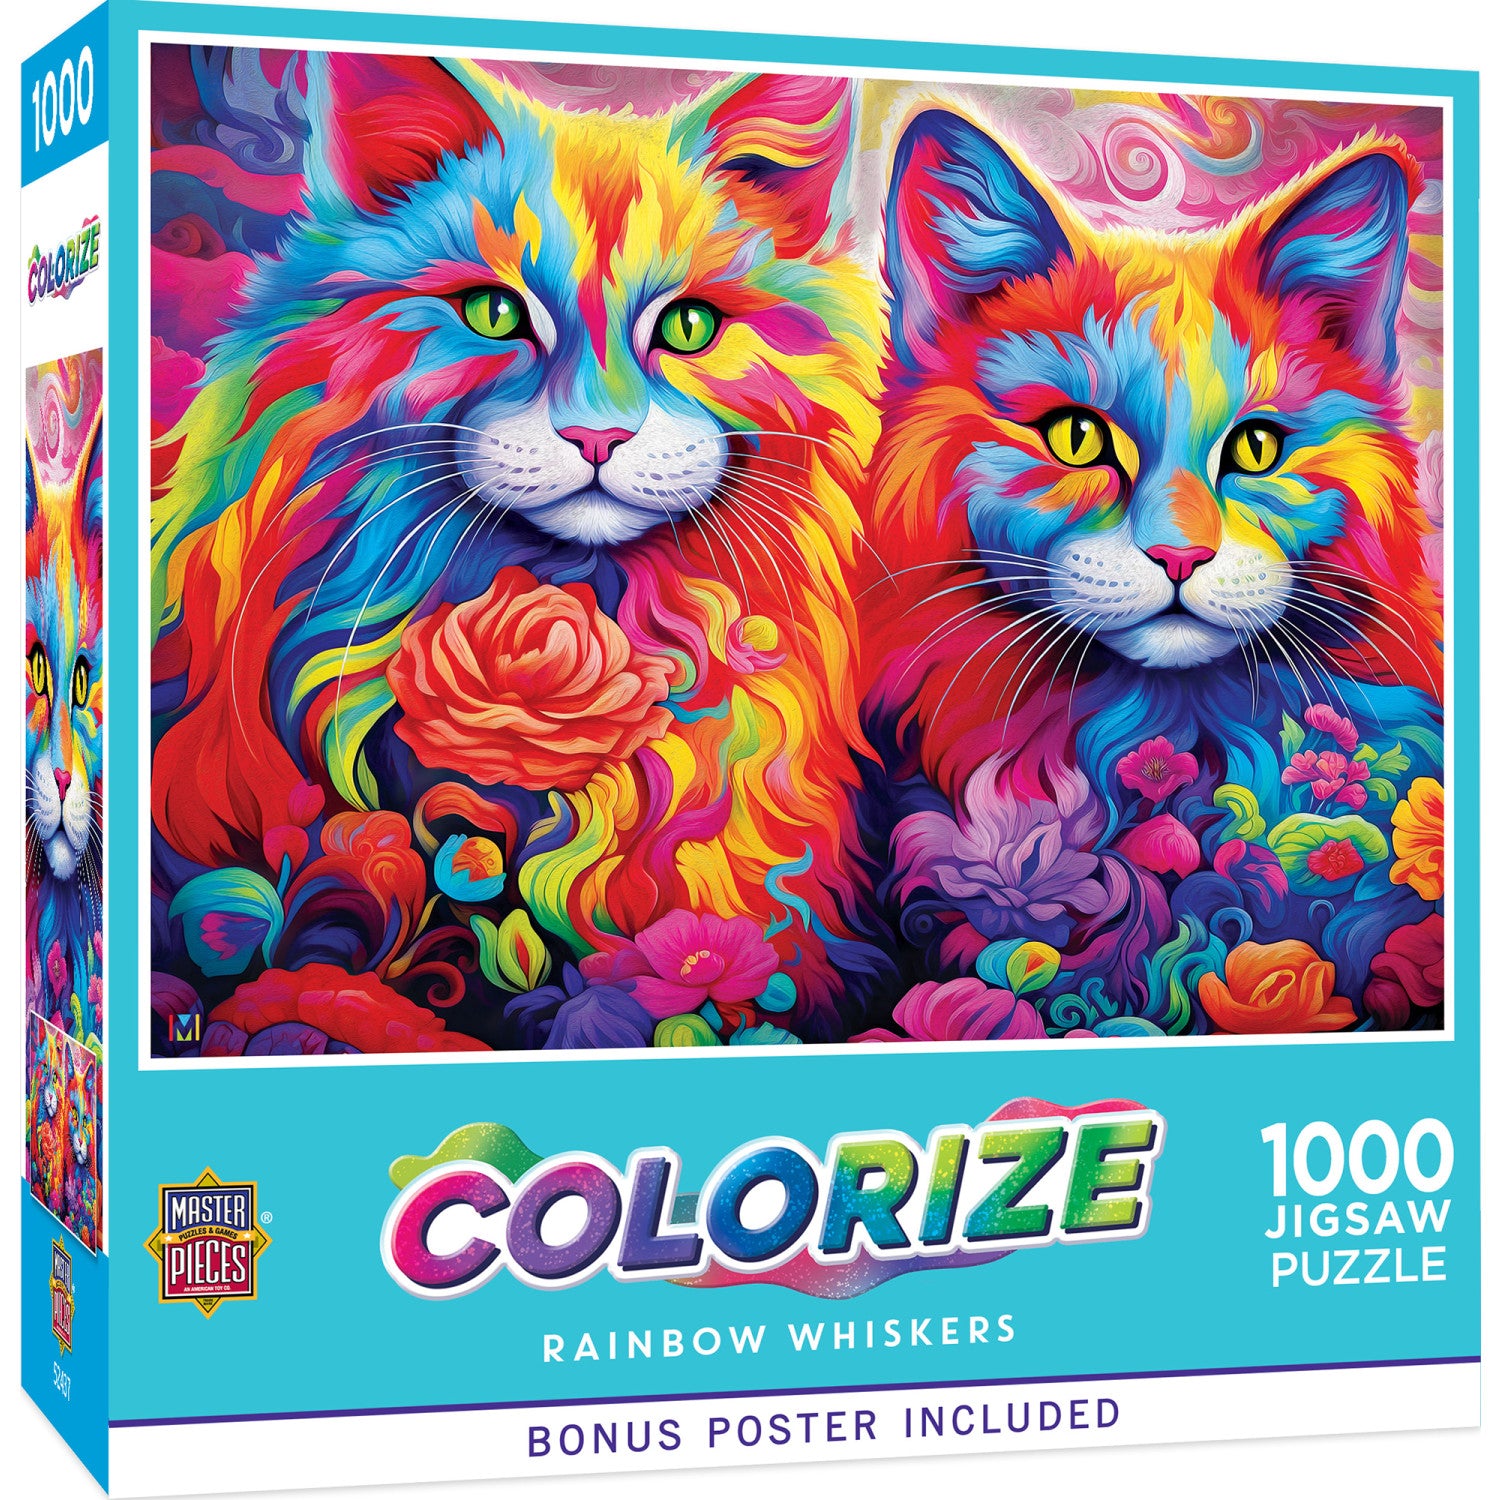 Colorize - Rainbow Whiskers 1000 Piece Jigsaw Puzzle